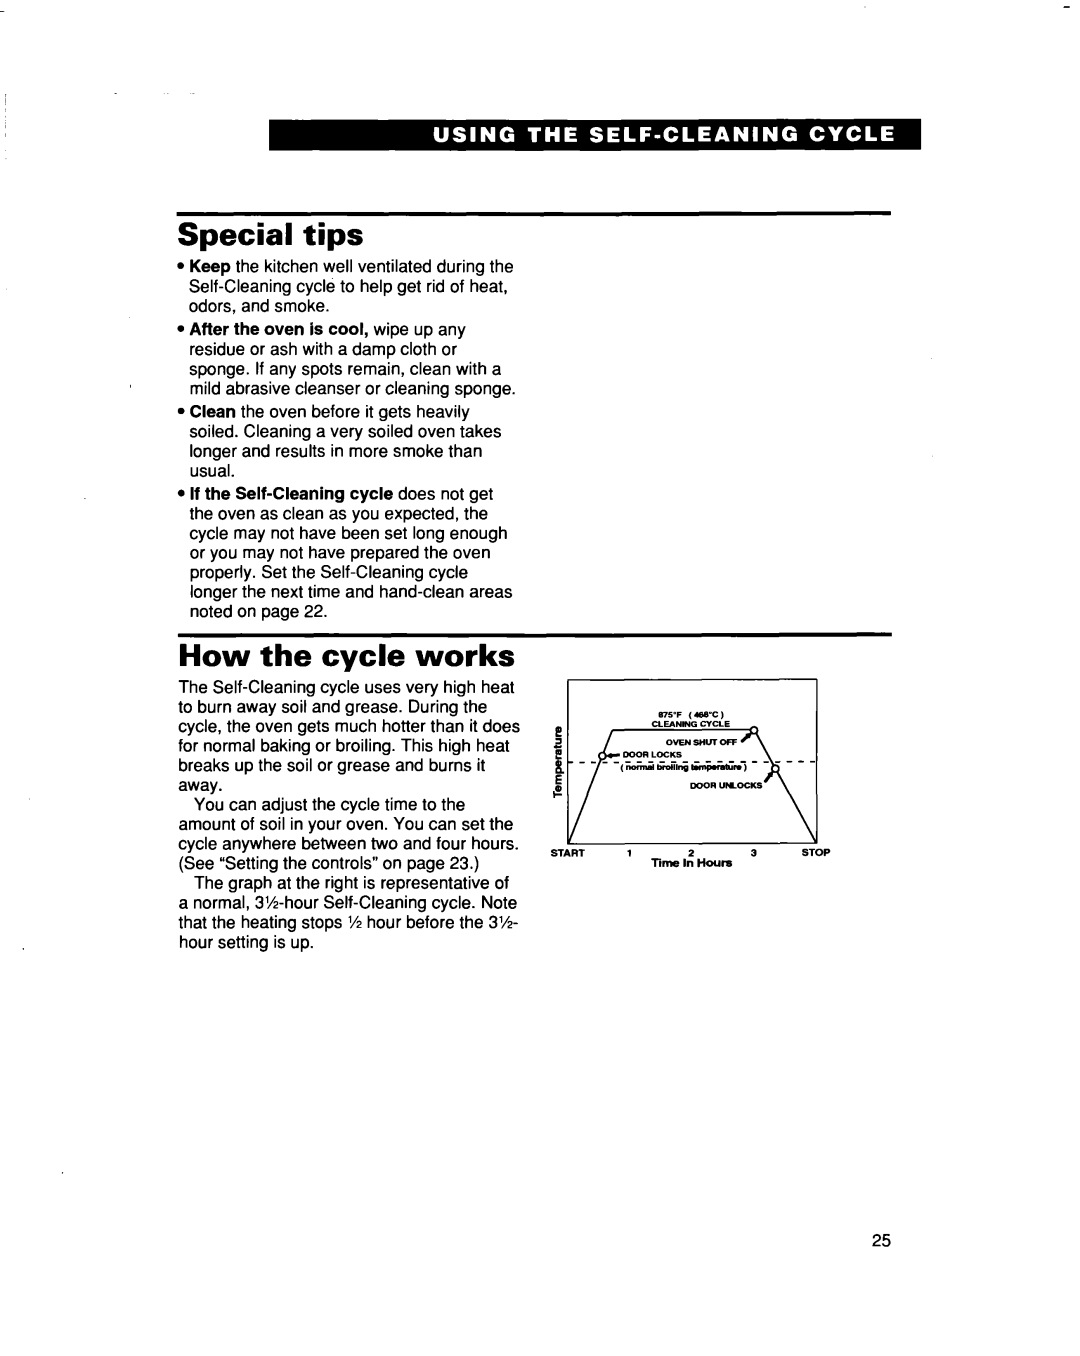 Whirlpool RF354BXD warranty Special tips, How the cycle works 